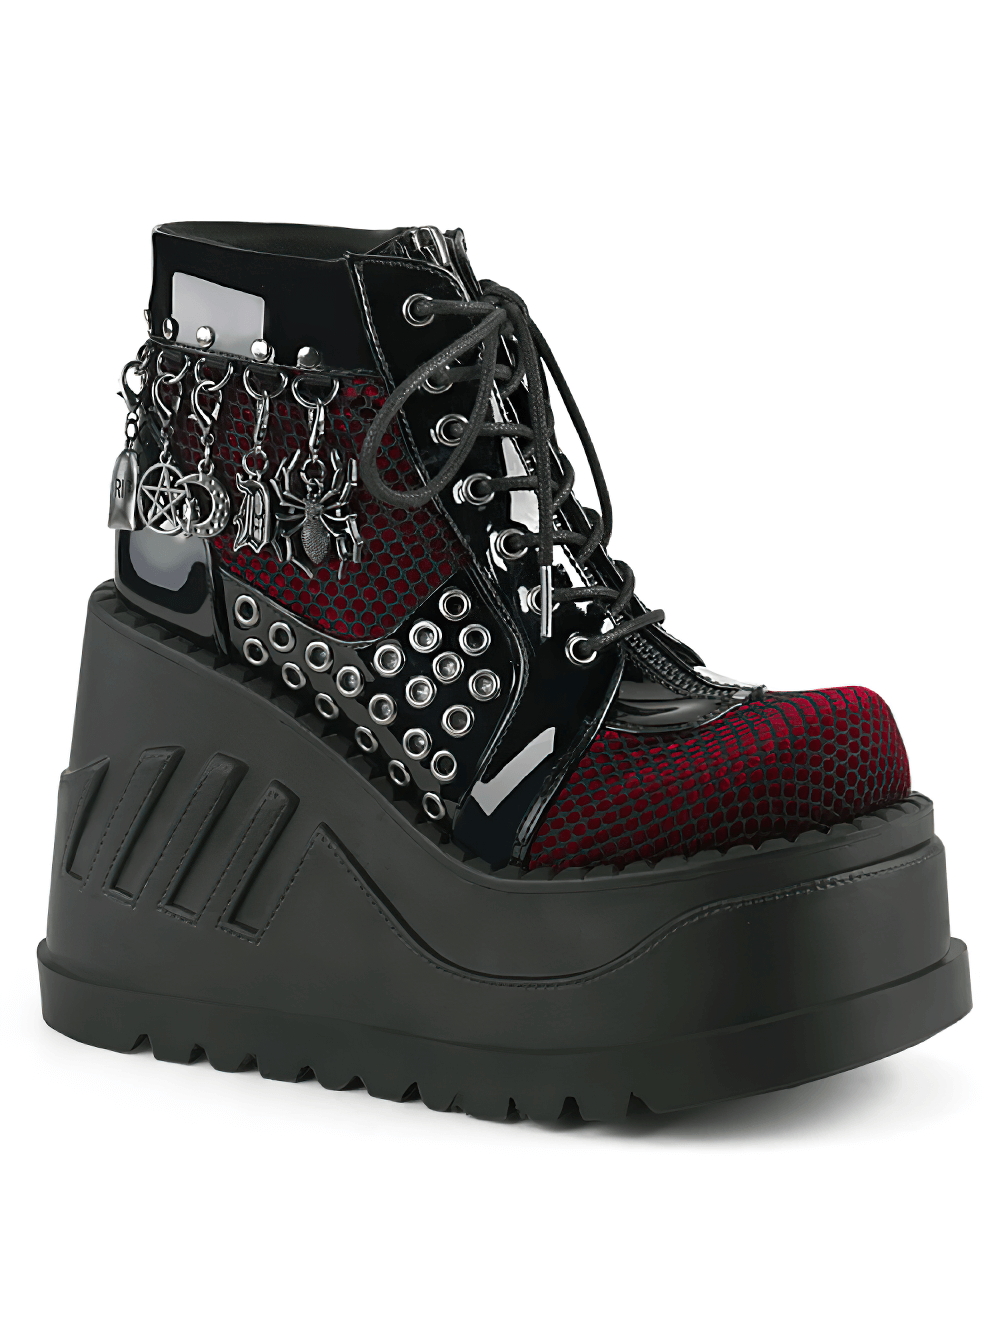 DEMONIA Gothic Platform Booties with Charms and Fishnet